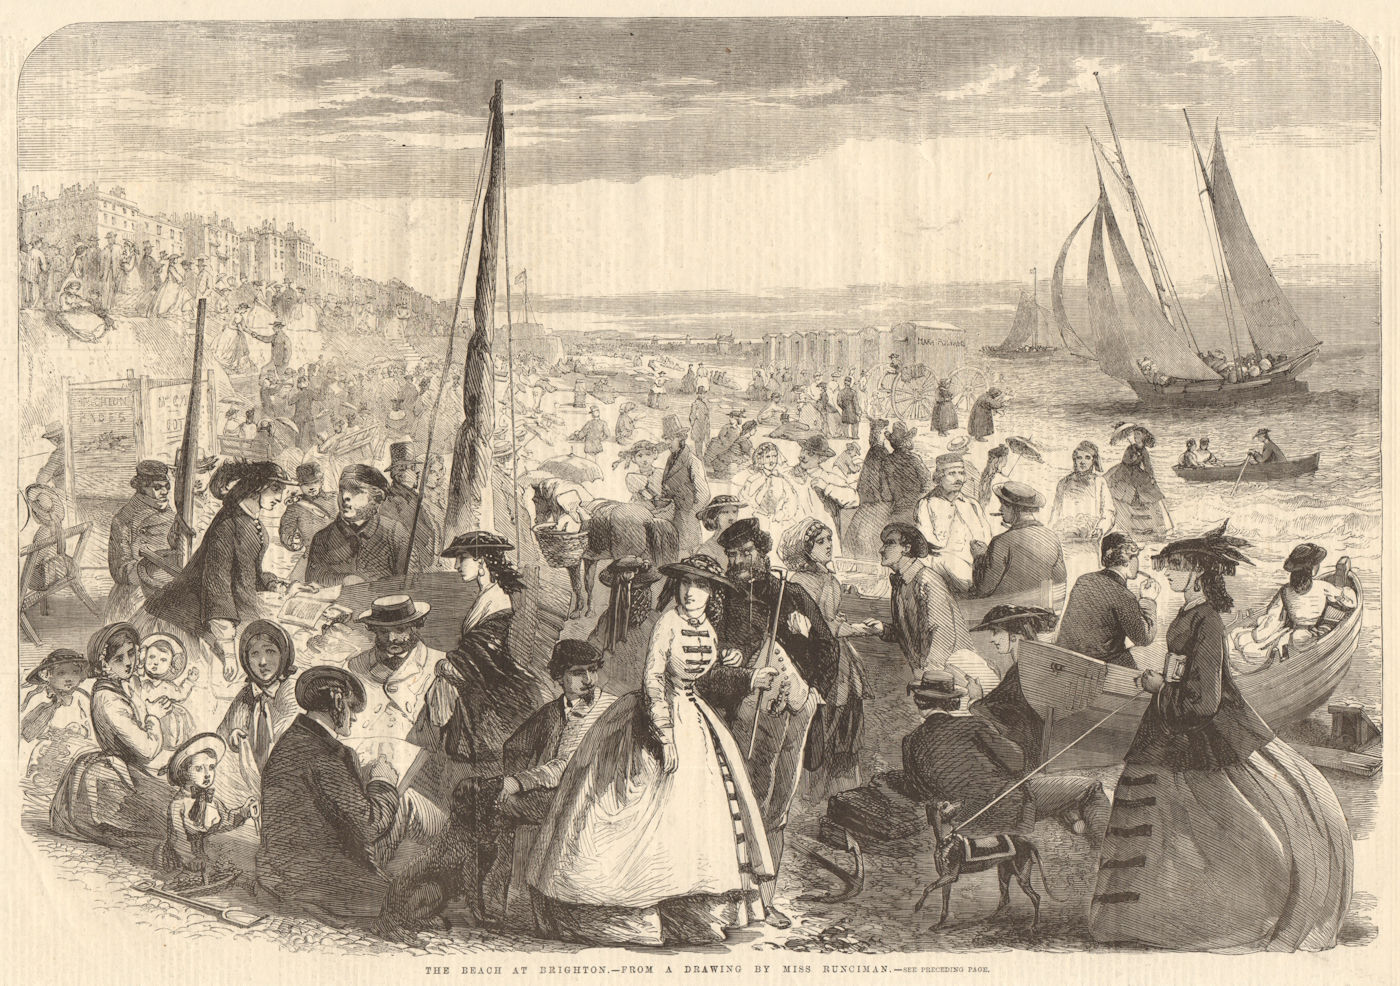 Associate Product The beach at Brighton - from a drawing by Miss Runciman. Sussex. Society 1859